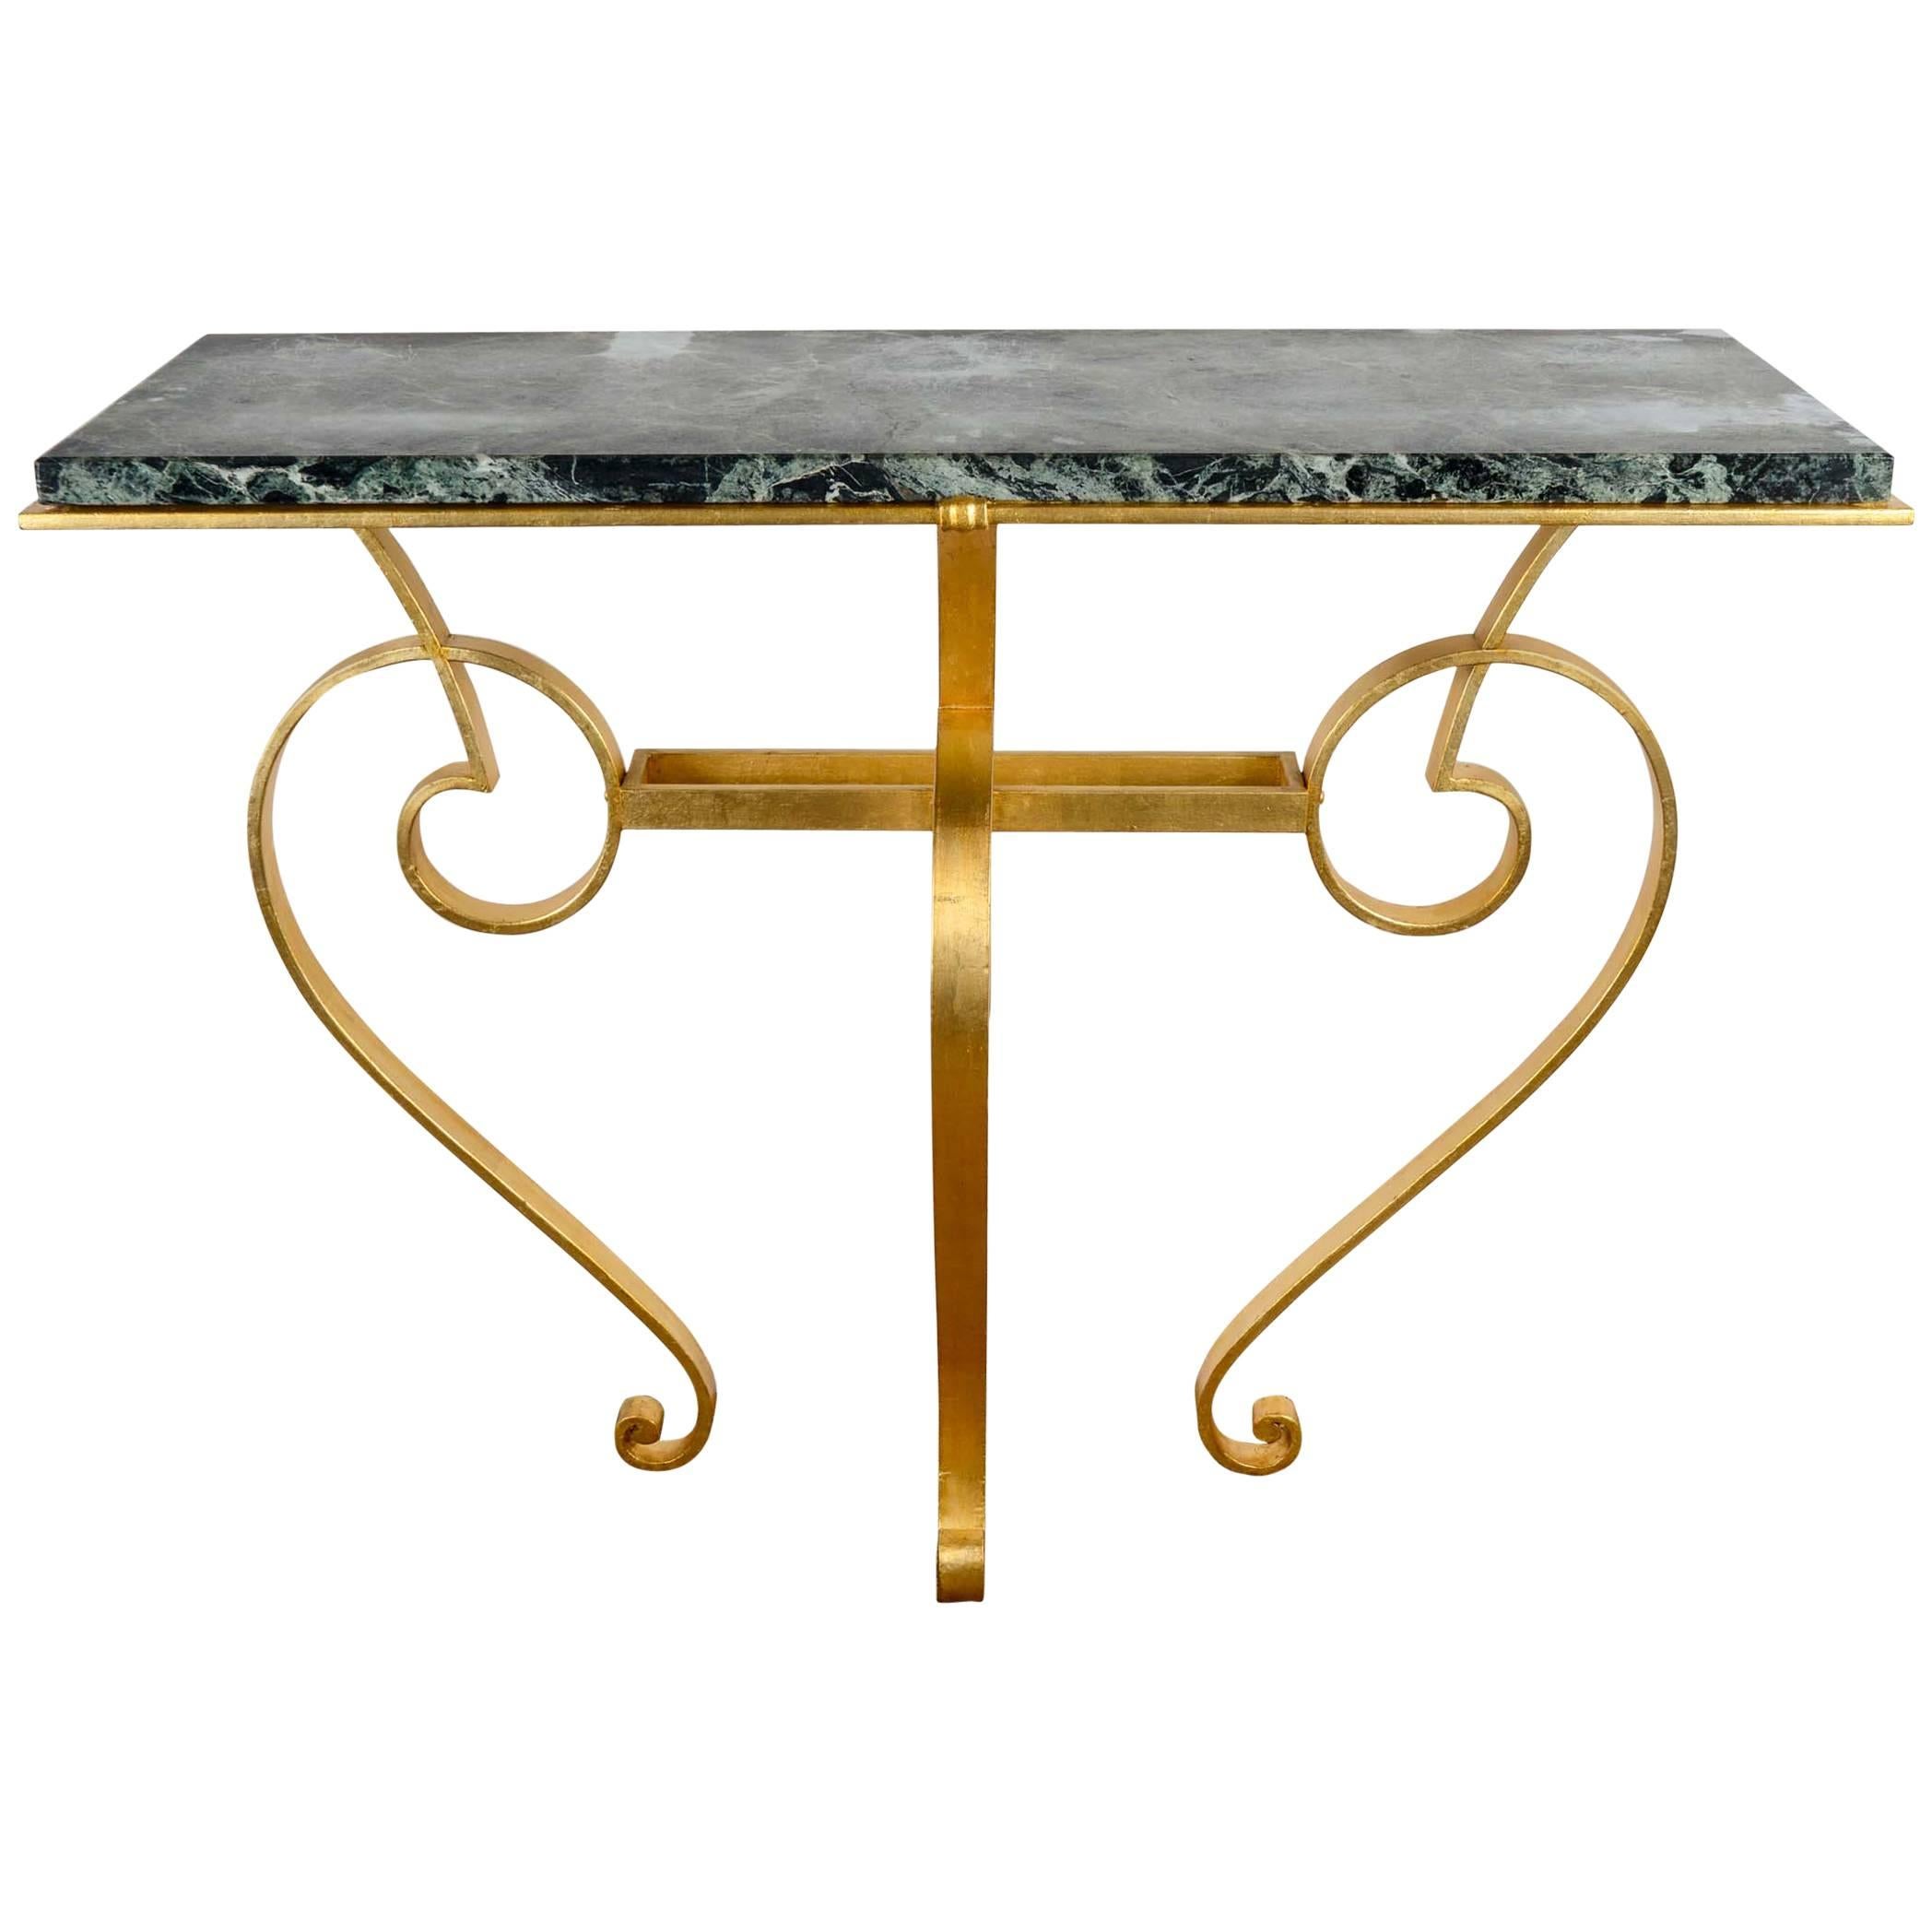 Console Table in Golded Wrought Iron with Top in Green Marble